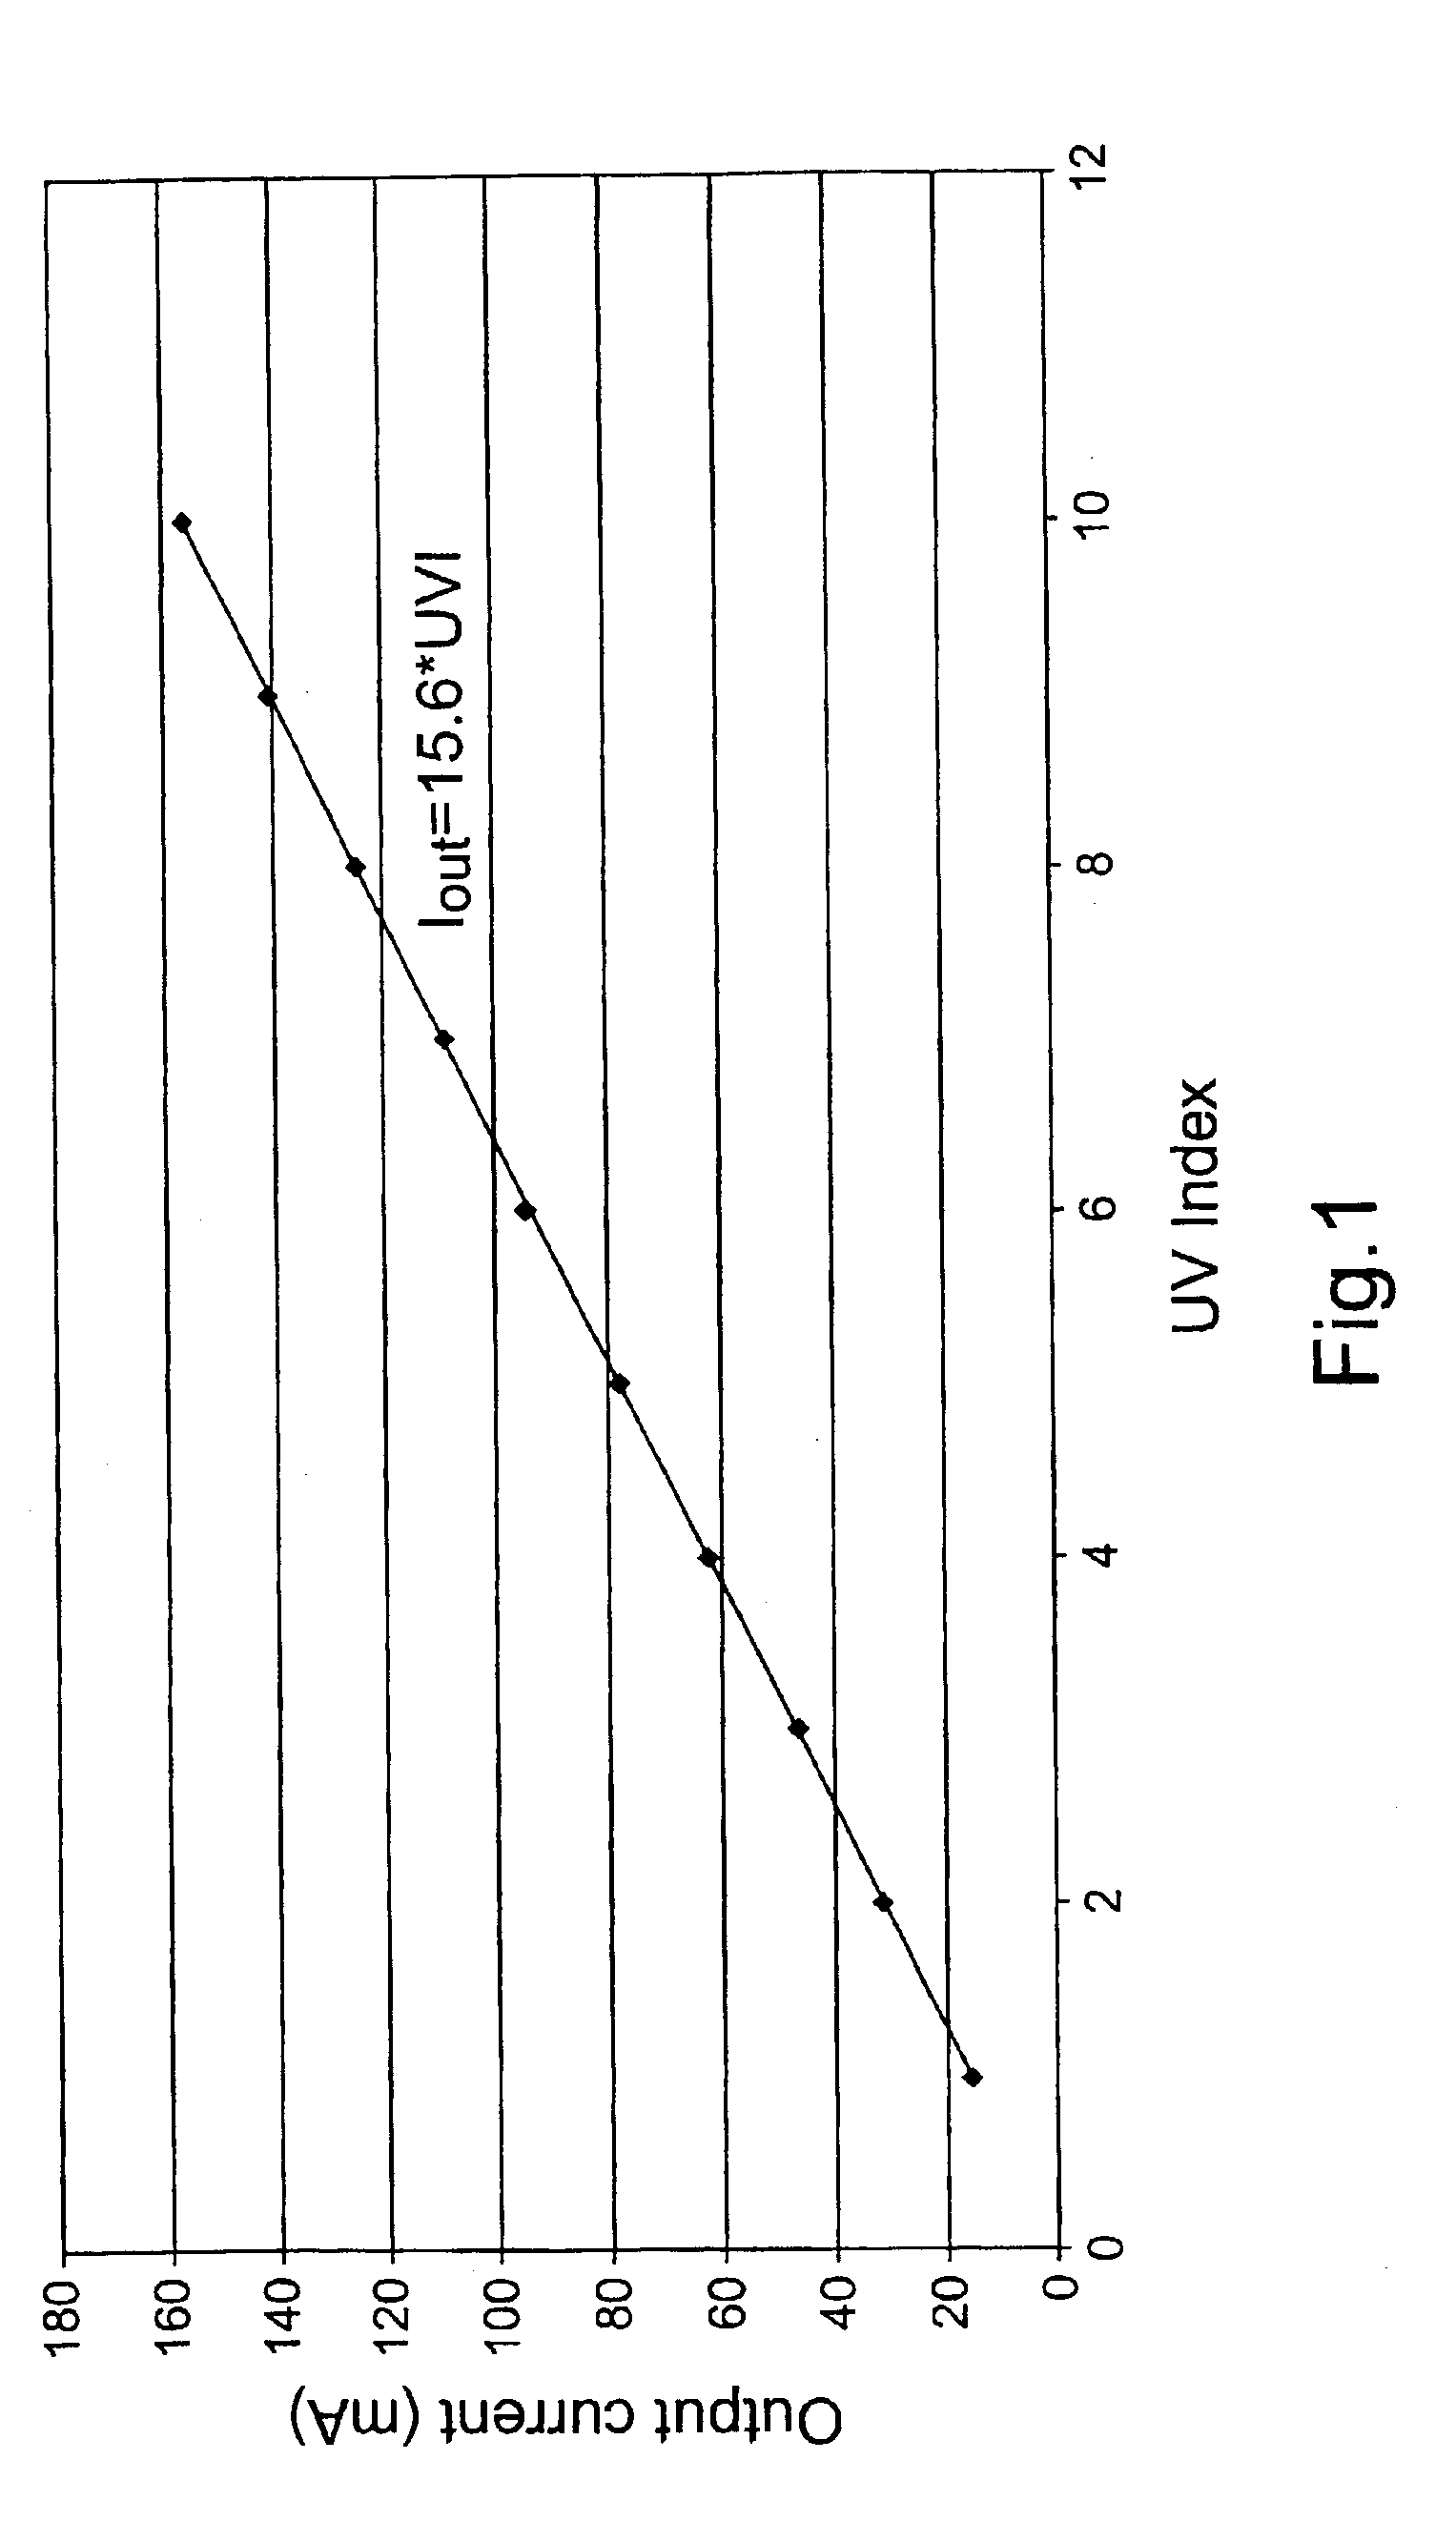 Automatic actuation of device according to UV intensity